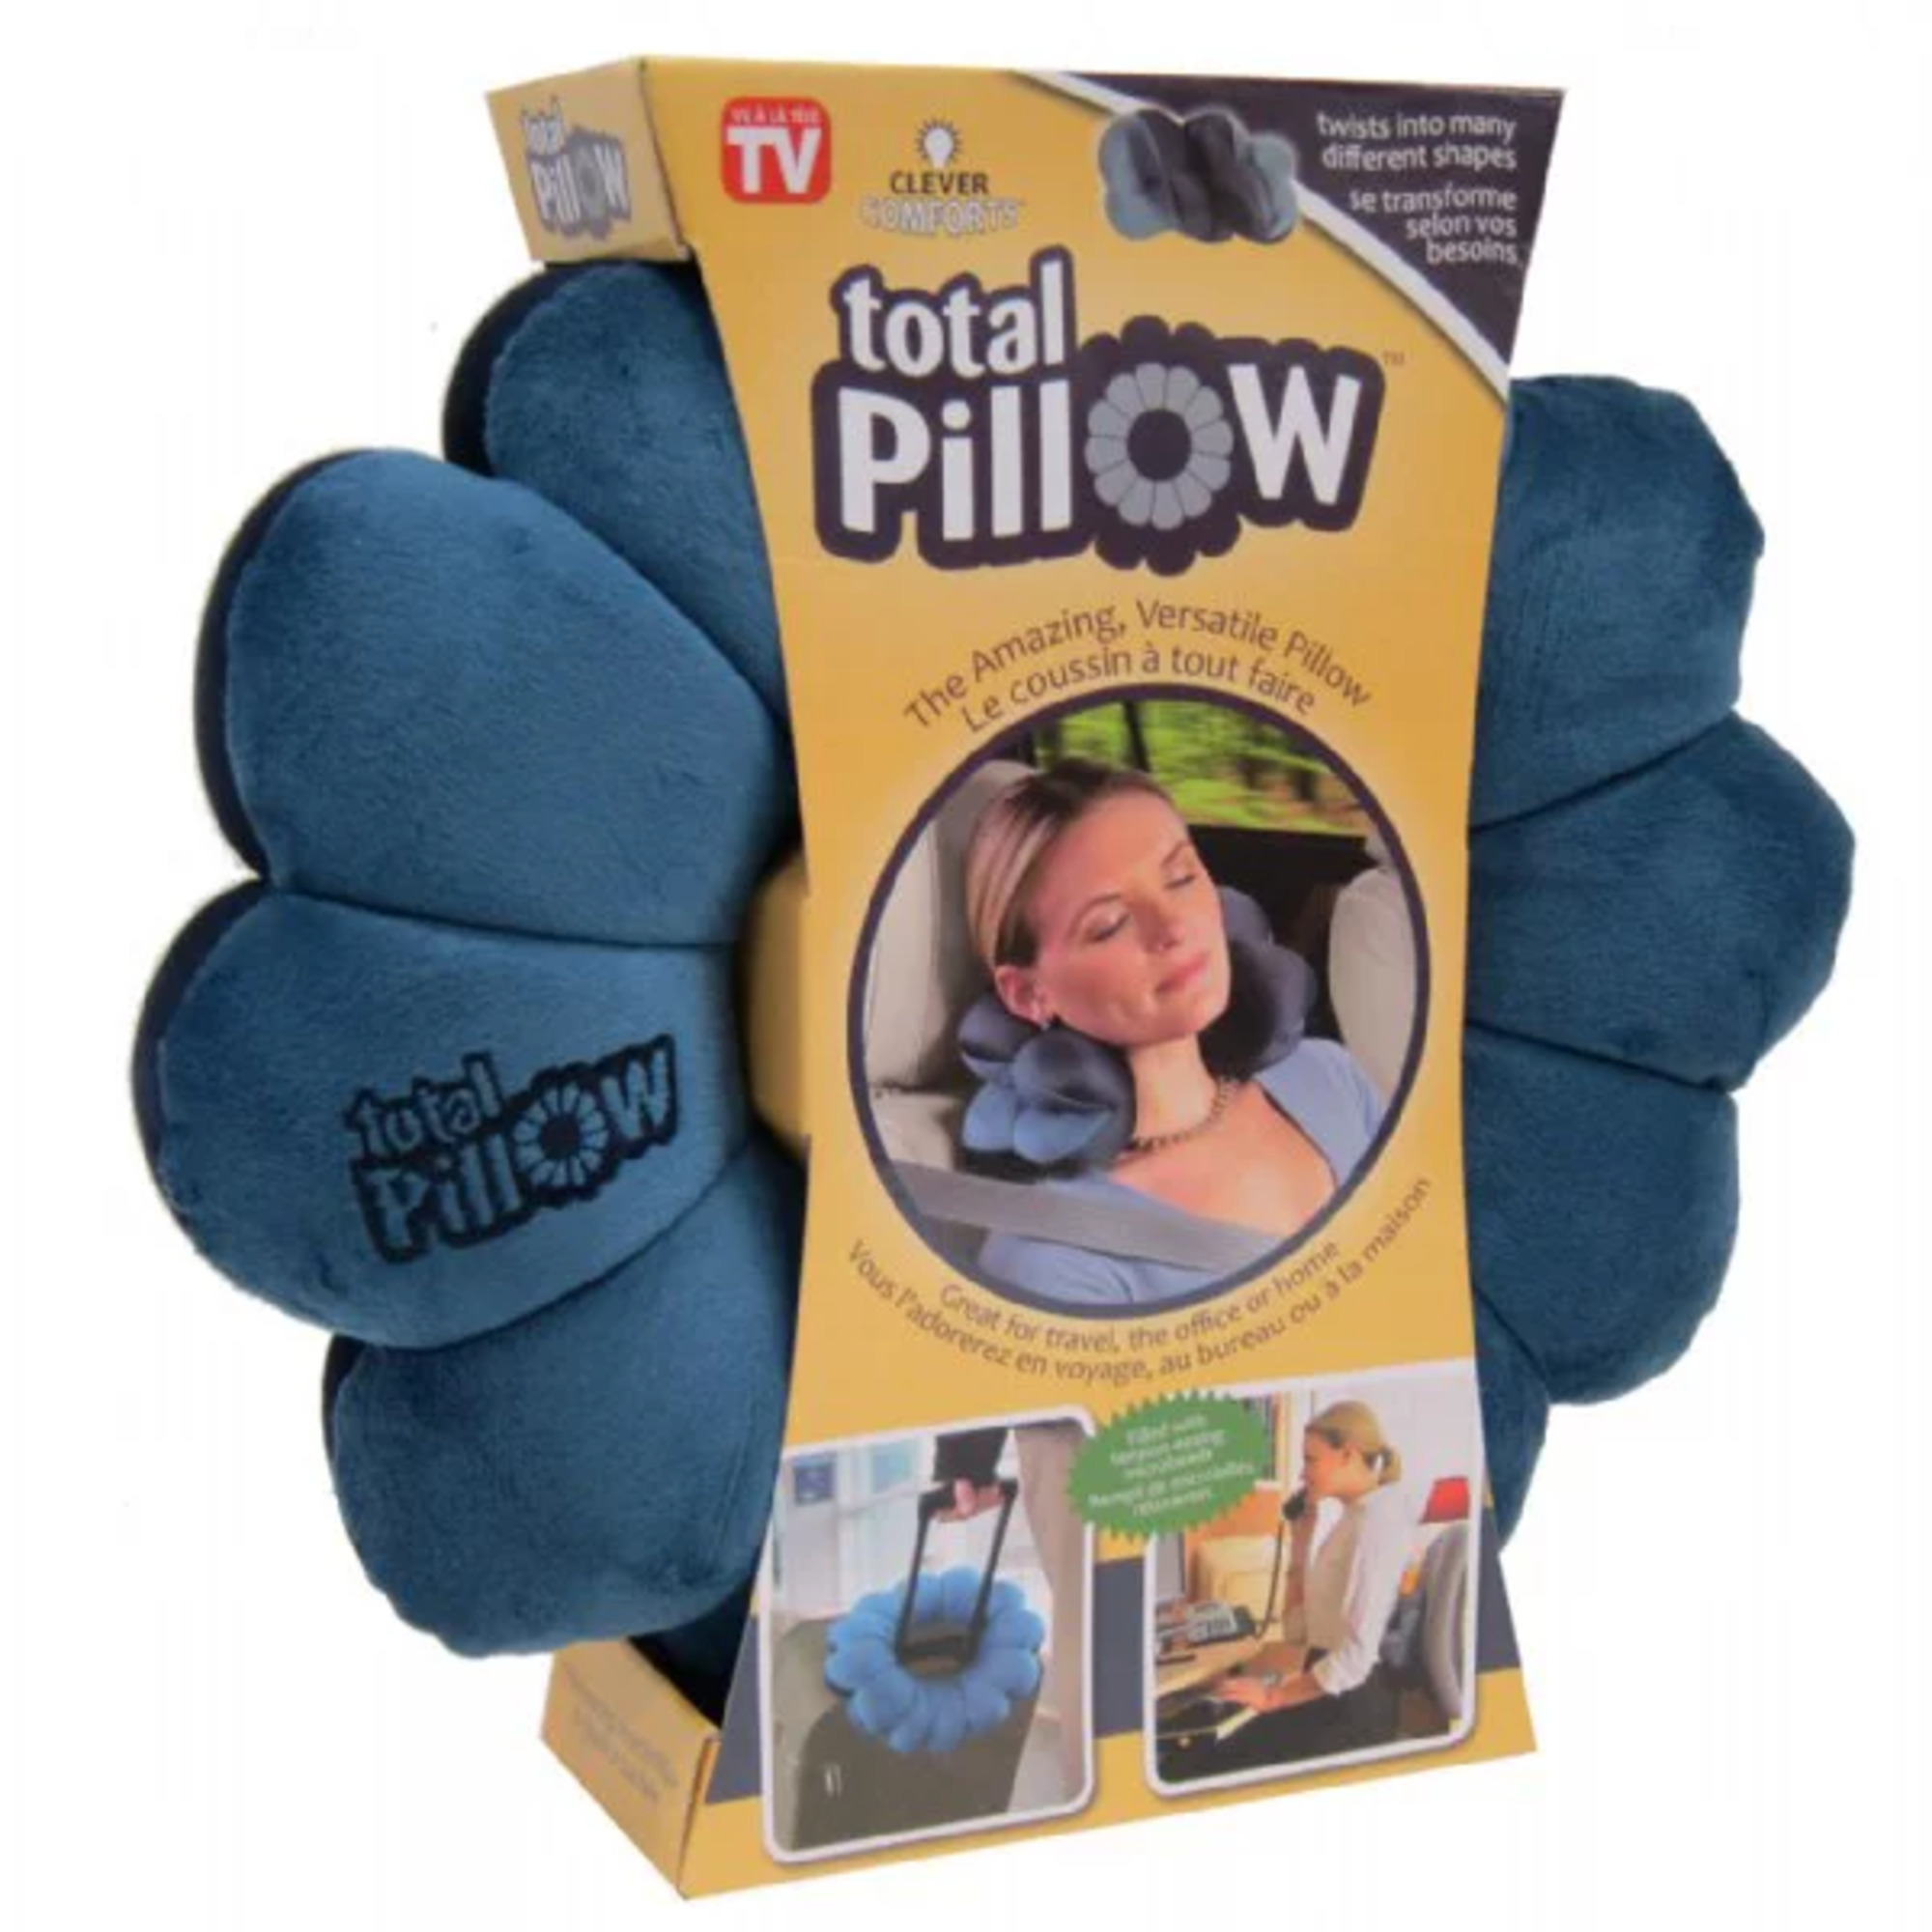 Total Pillow Microbead Adjustable Pillow for Neck and Lumbar Support,  Blue - image 1 of 7